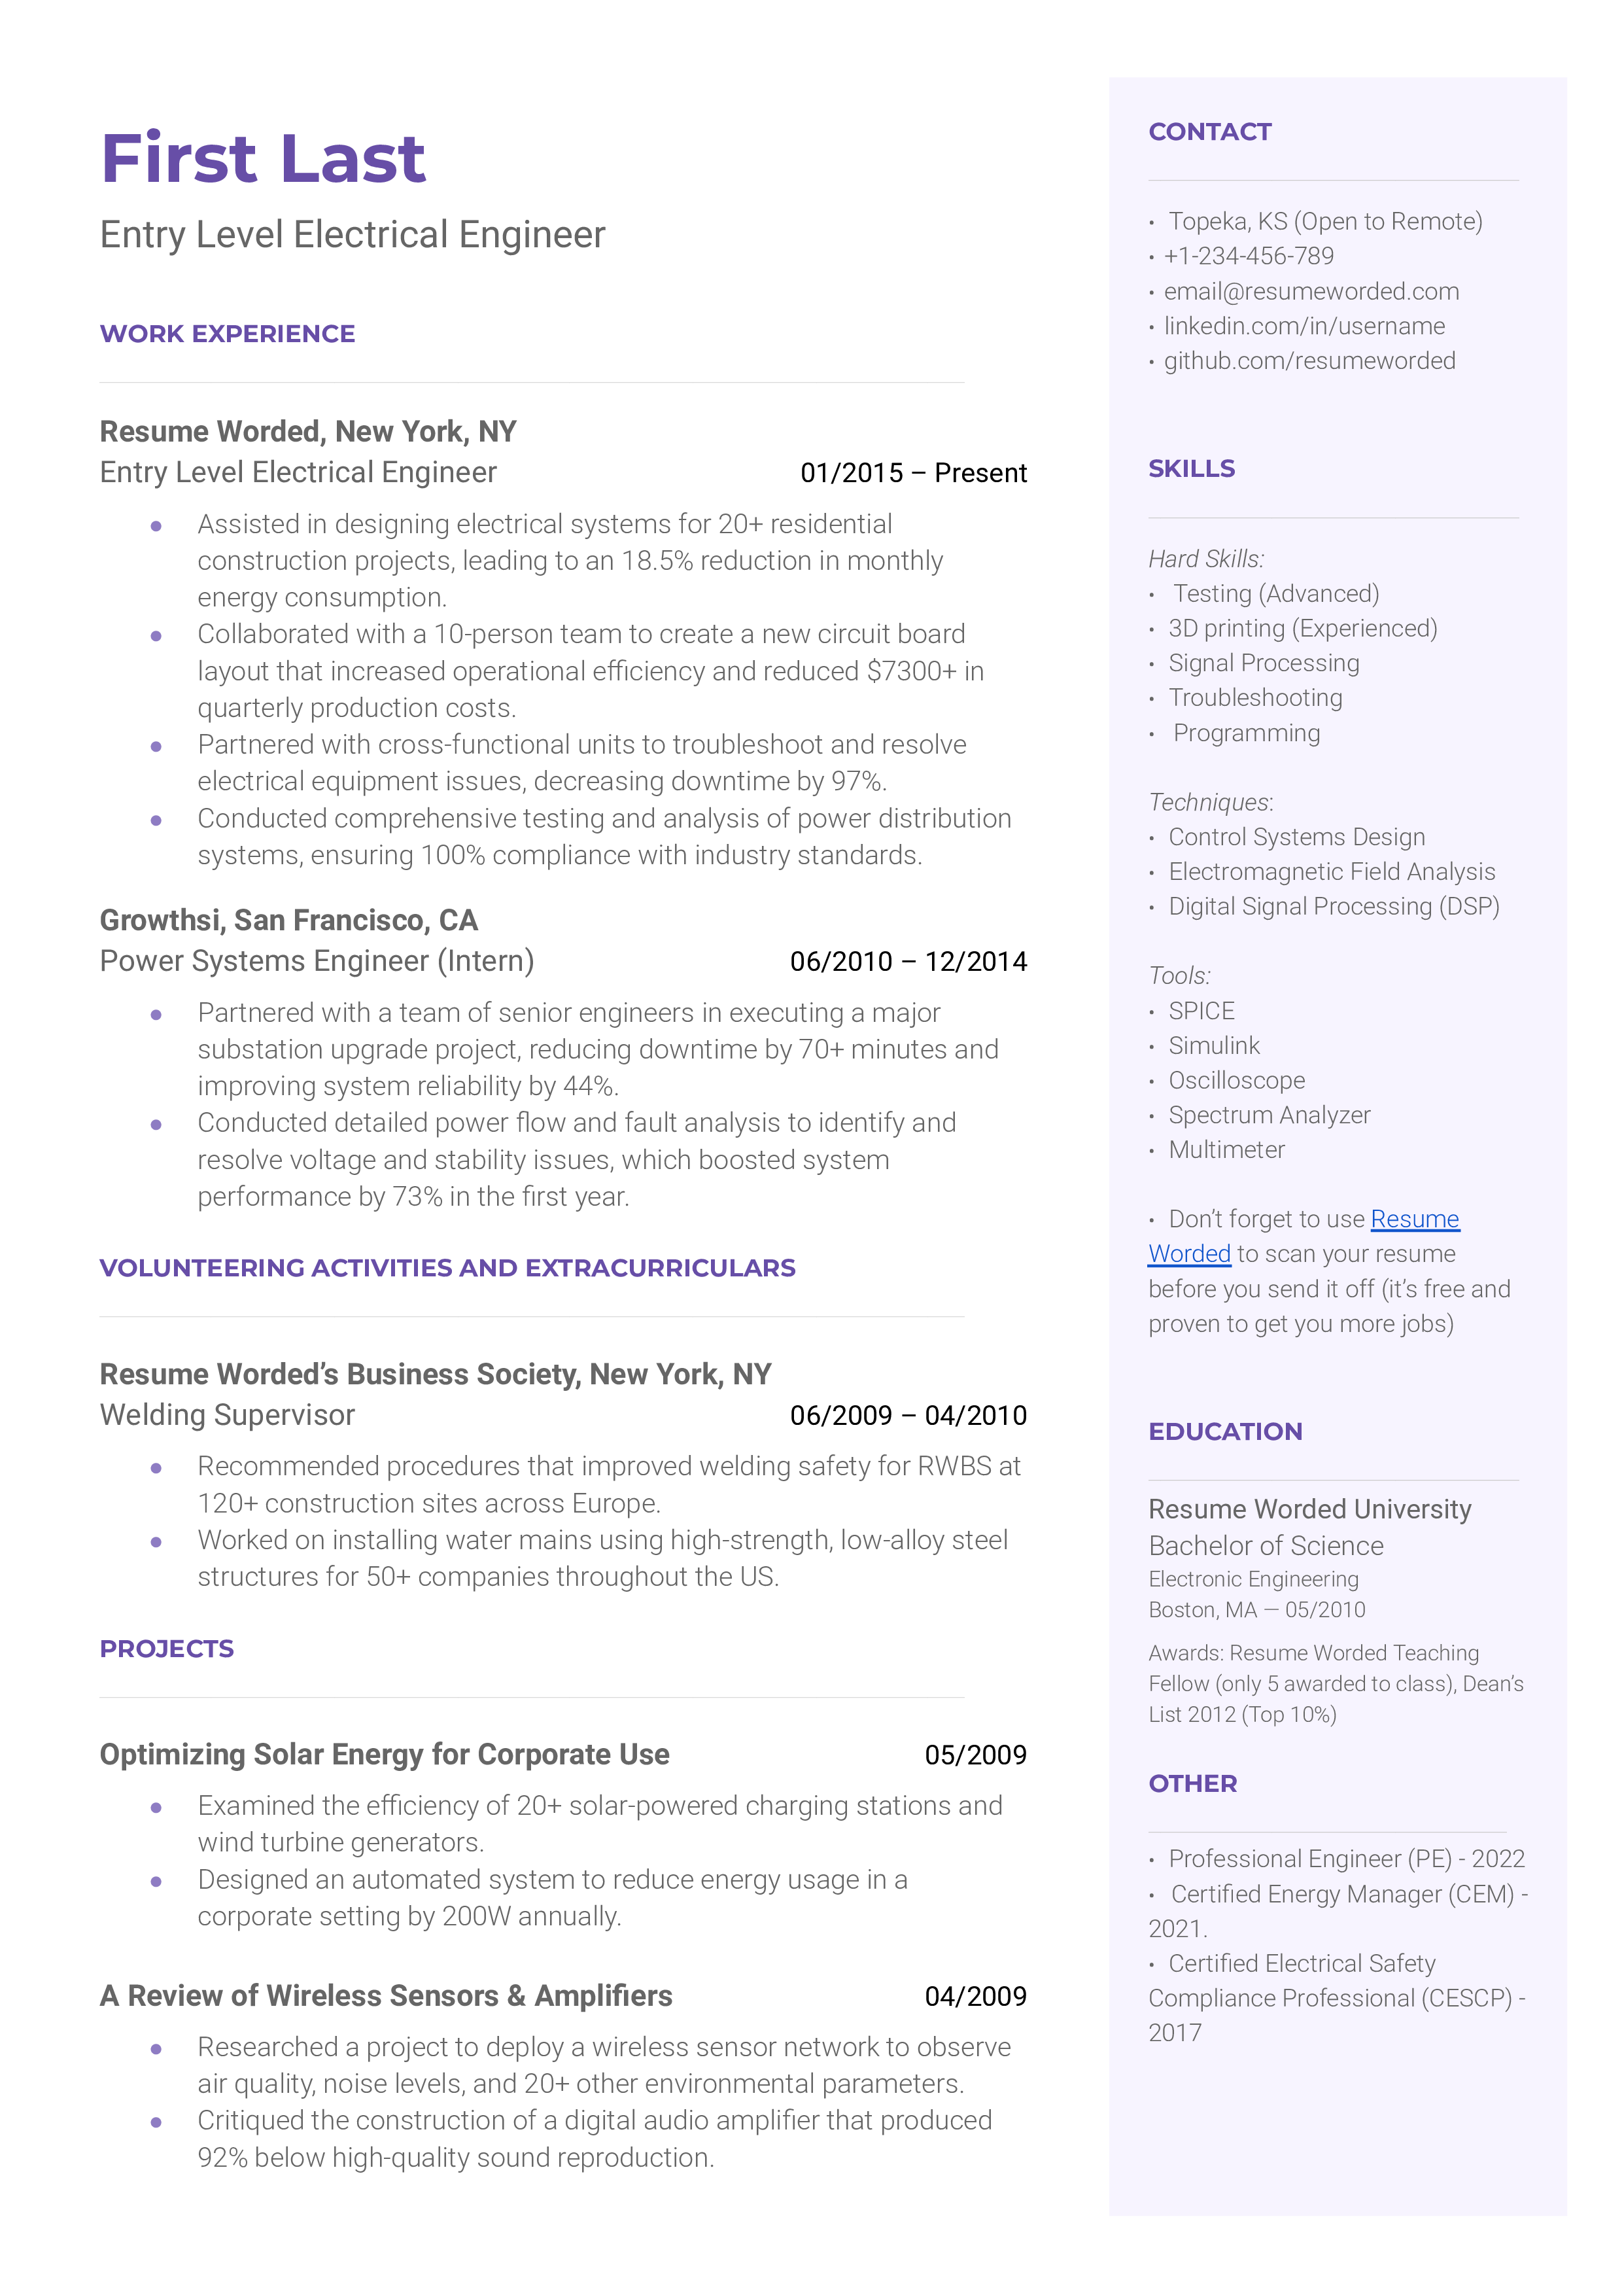 A well-structured resume for an entry level electrical engineer highlighting technical and teamwork skills.